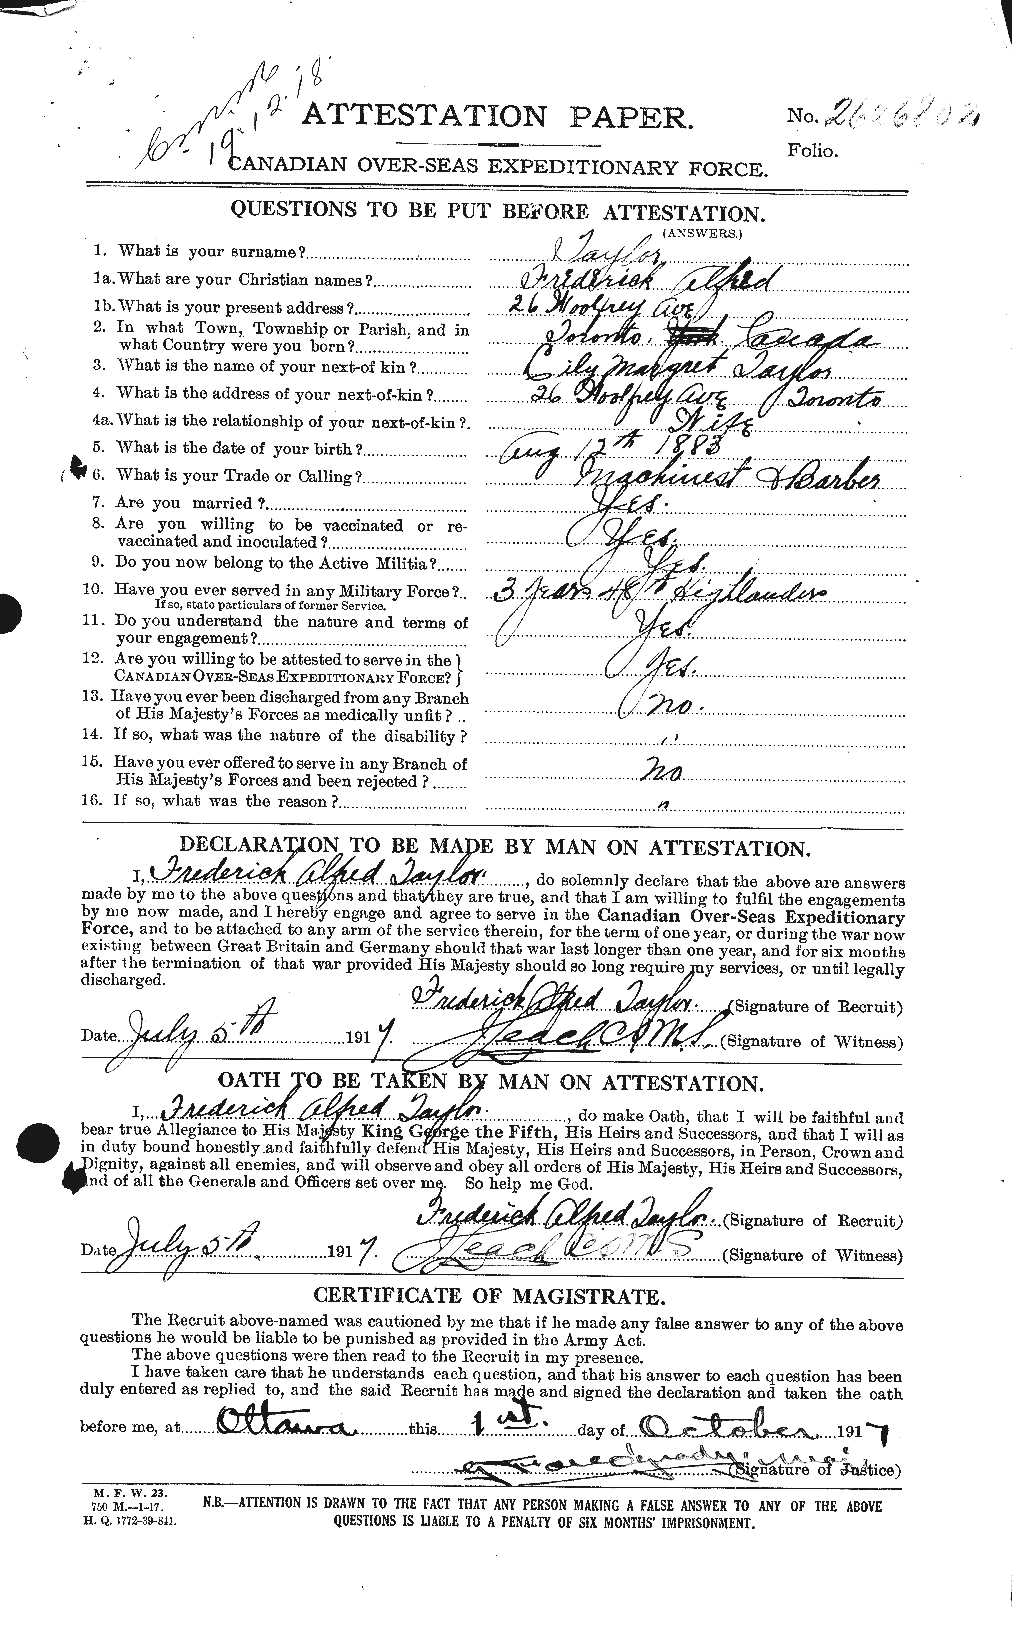 Personnel Records of the First World War - CEF 625786a